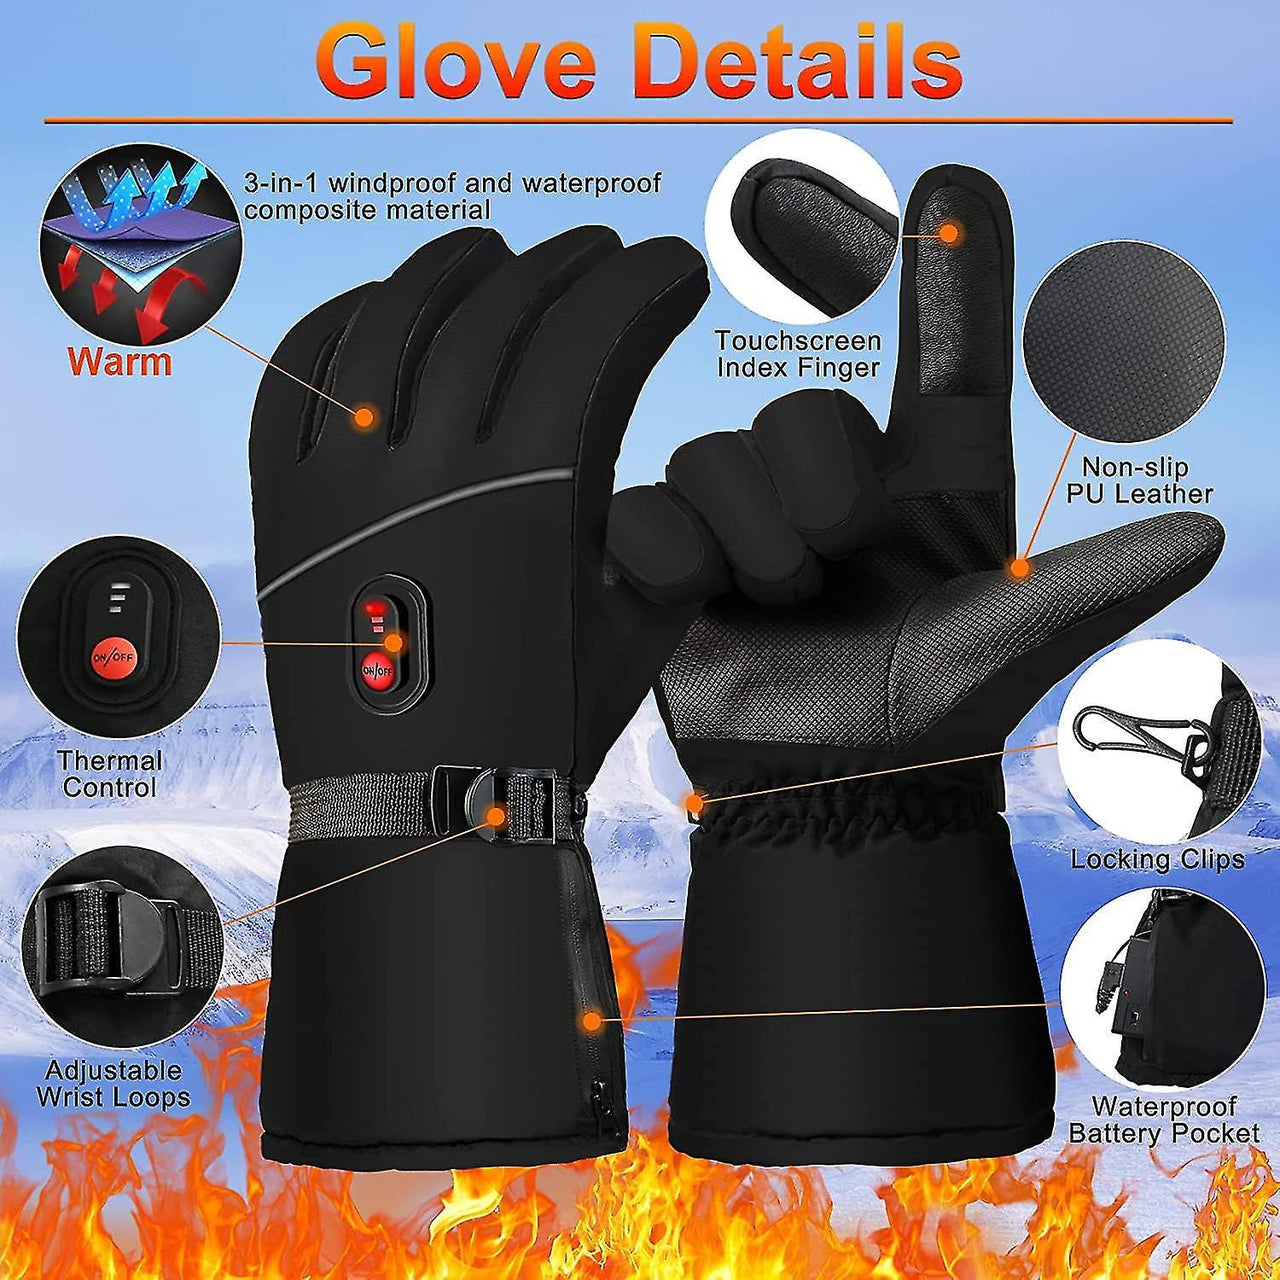 Heated Gloves, Rechargeable Electric Battery Heating Gloves, Touchscreen Heated Gloves